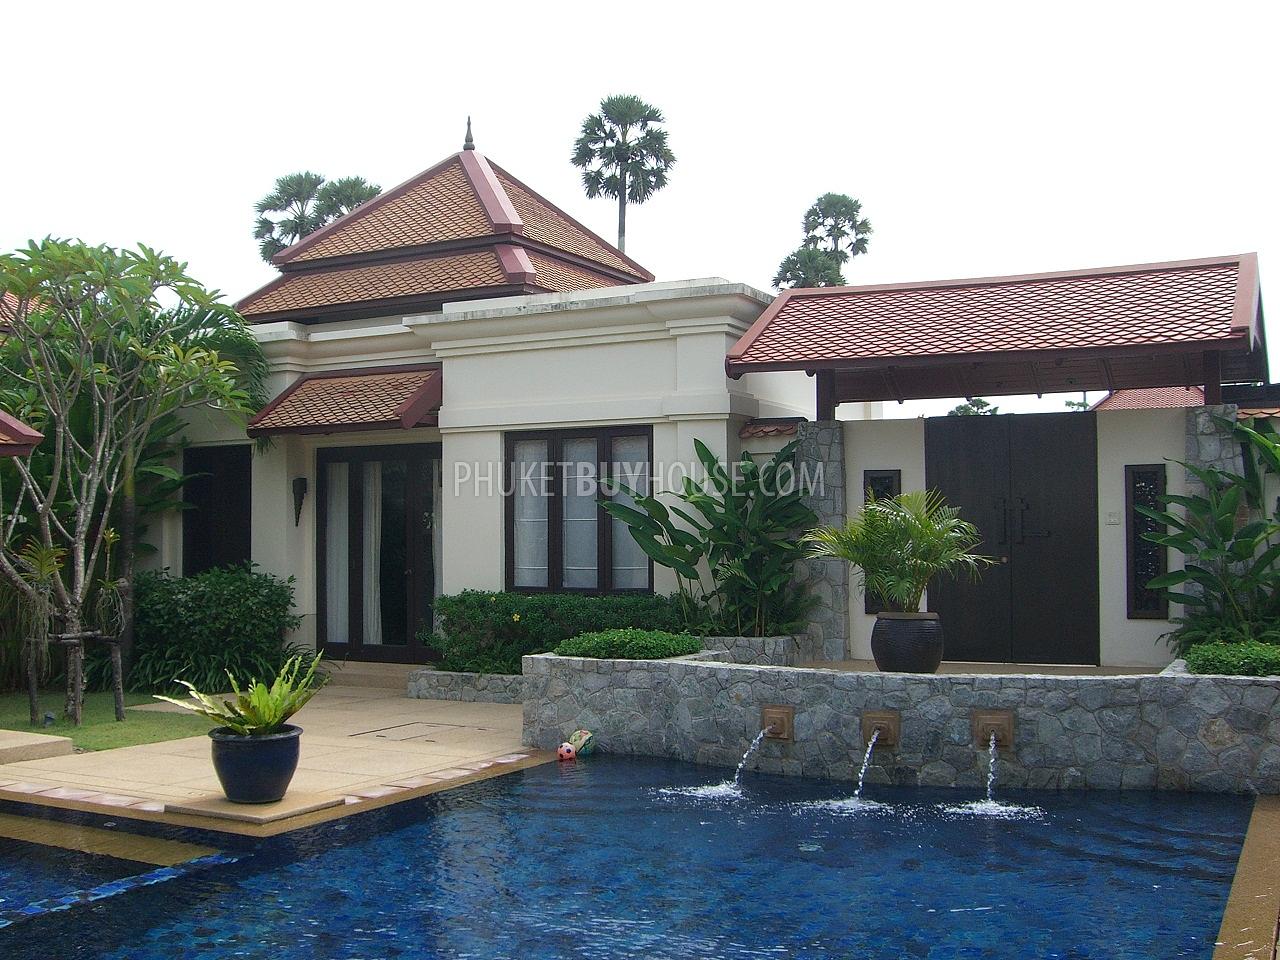 BAN1211: Villa with overlooks the Pool and exquisite Thai garden. Photo #4